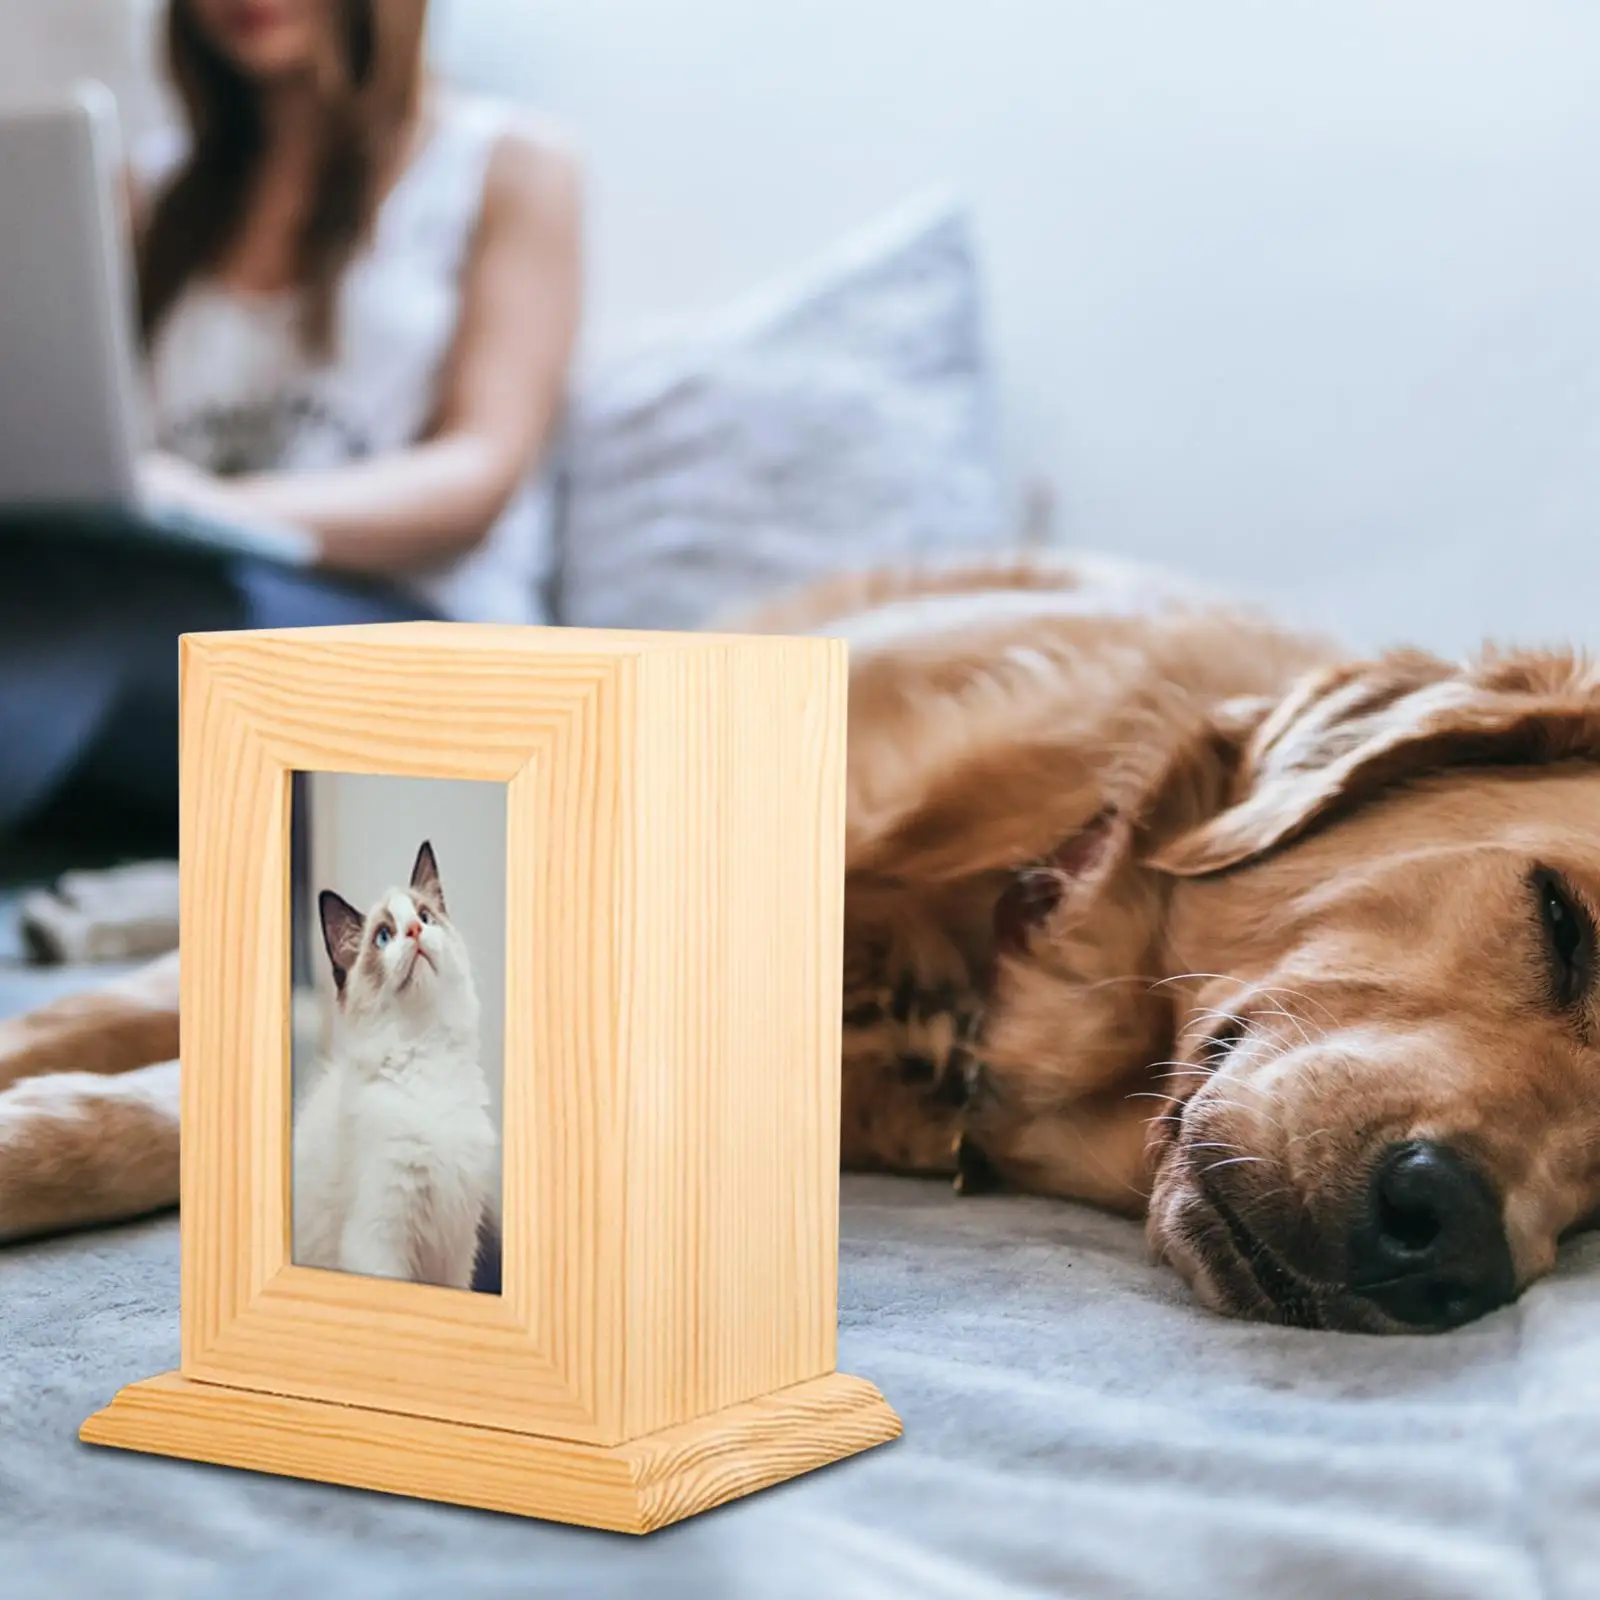 Wood Pet Cremation Urn for Dogs Cats Ashes Remembrance Cinerary Casket Memorial Keepsake Box Photo Frame Funeral Supplies images - 6